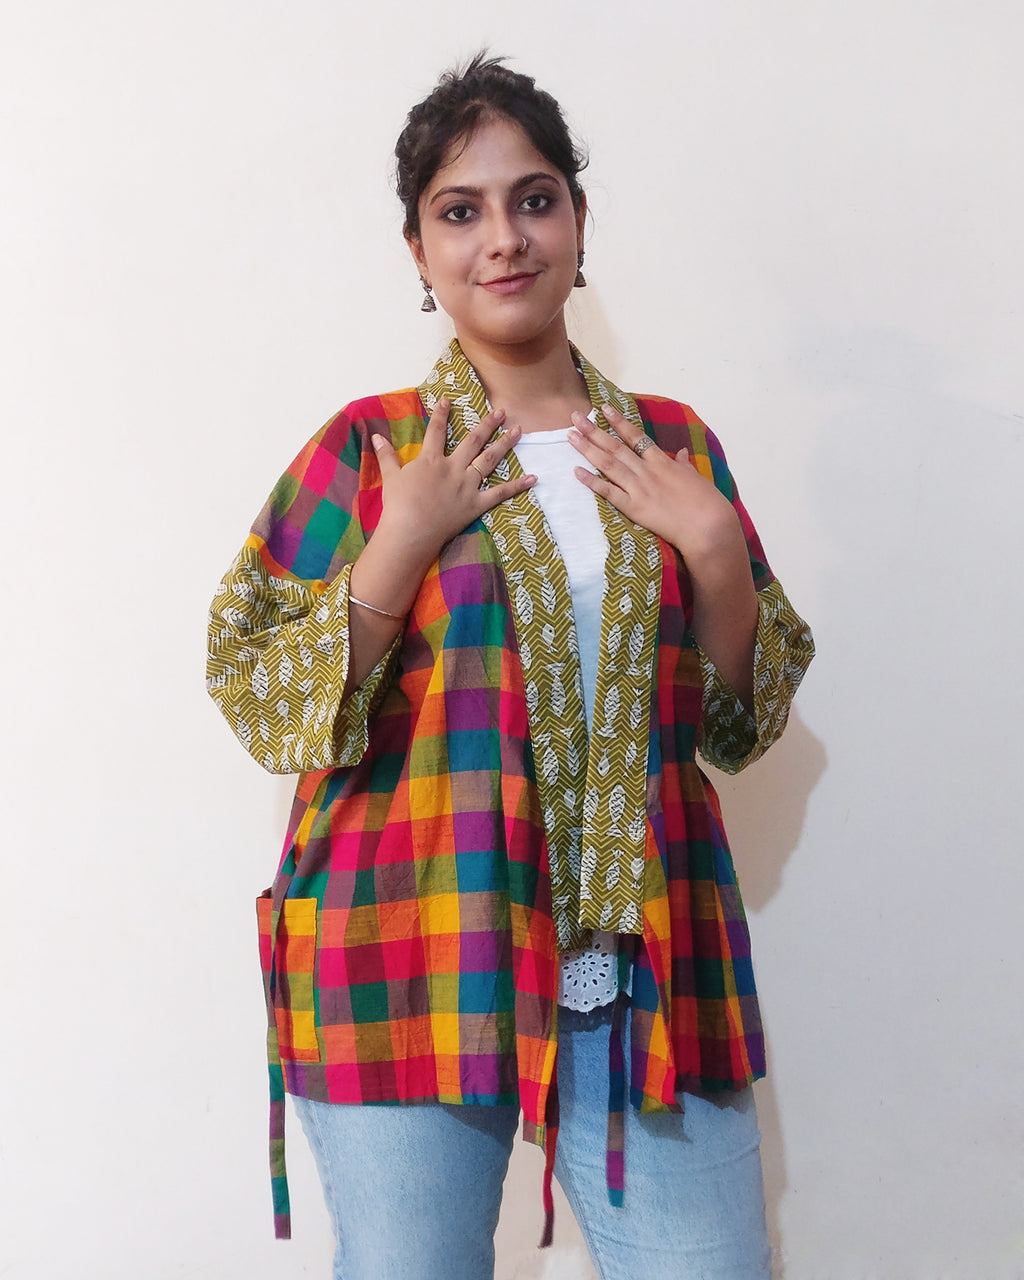 Breezy and comfy Kimono (Jinbei) Jacket with super popular colourful plaid Indian handloom cotton! Bet you would live in it. Buy online!